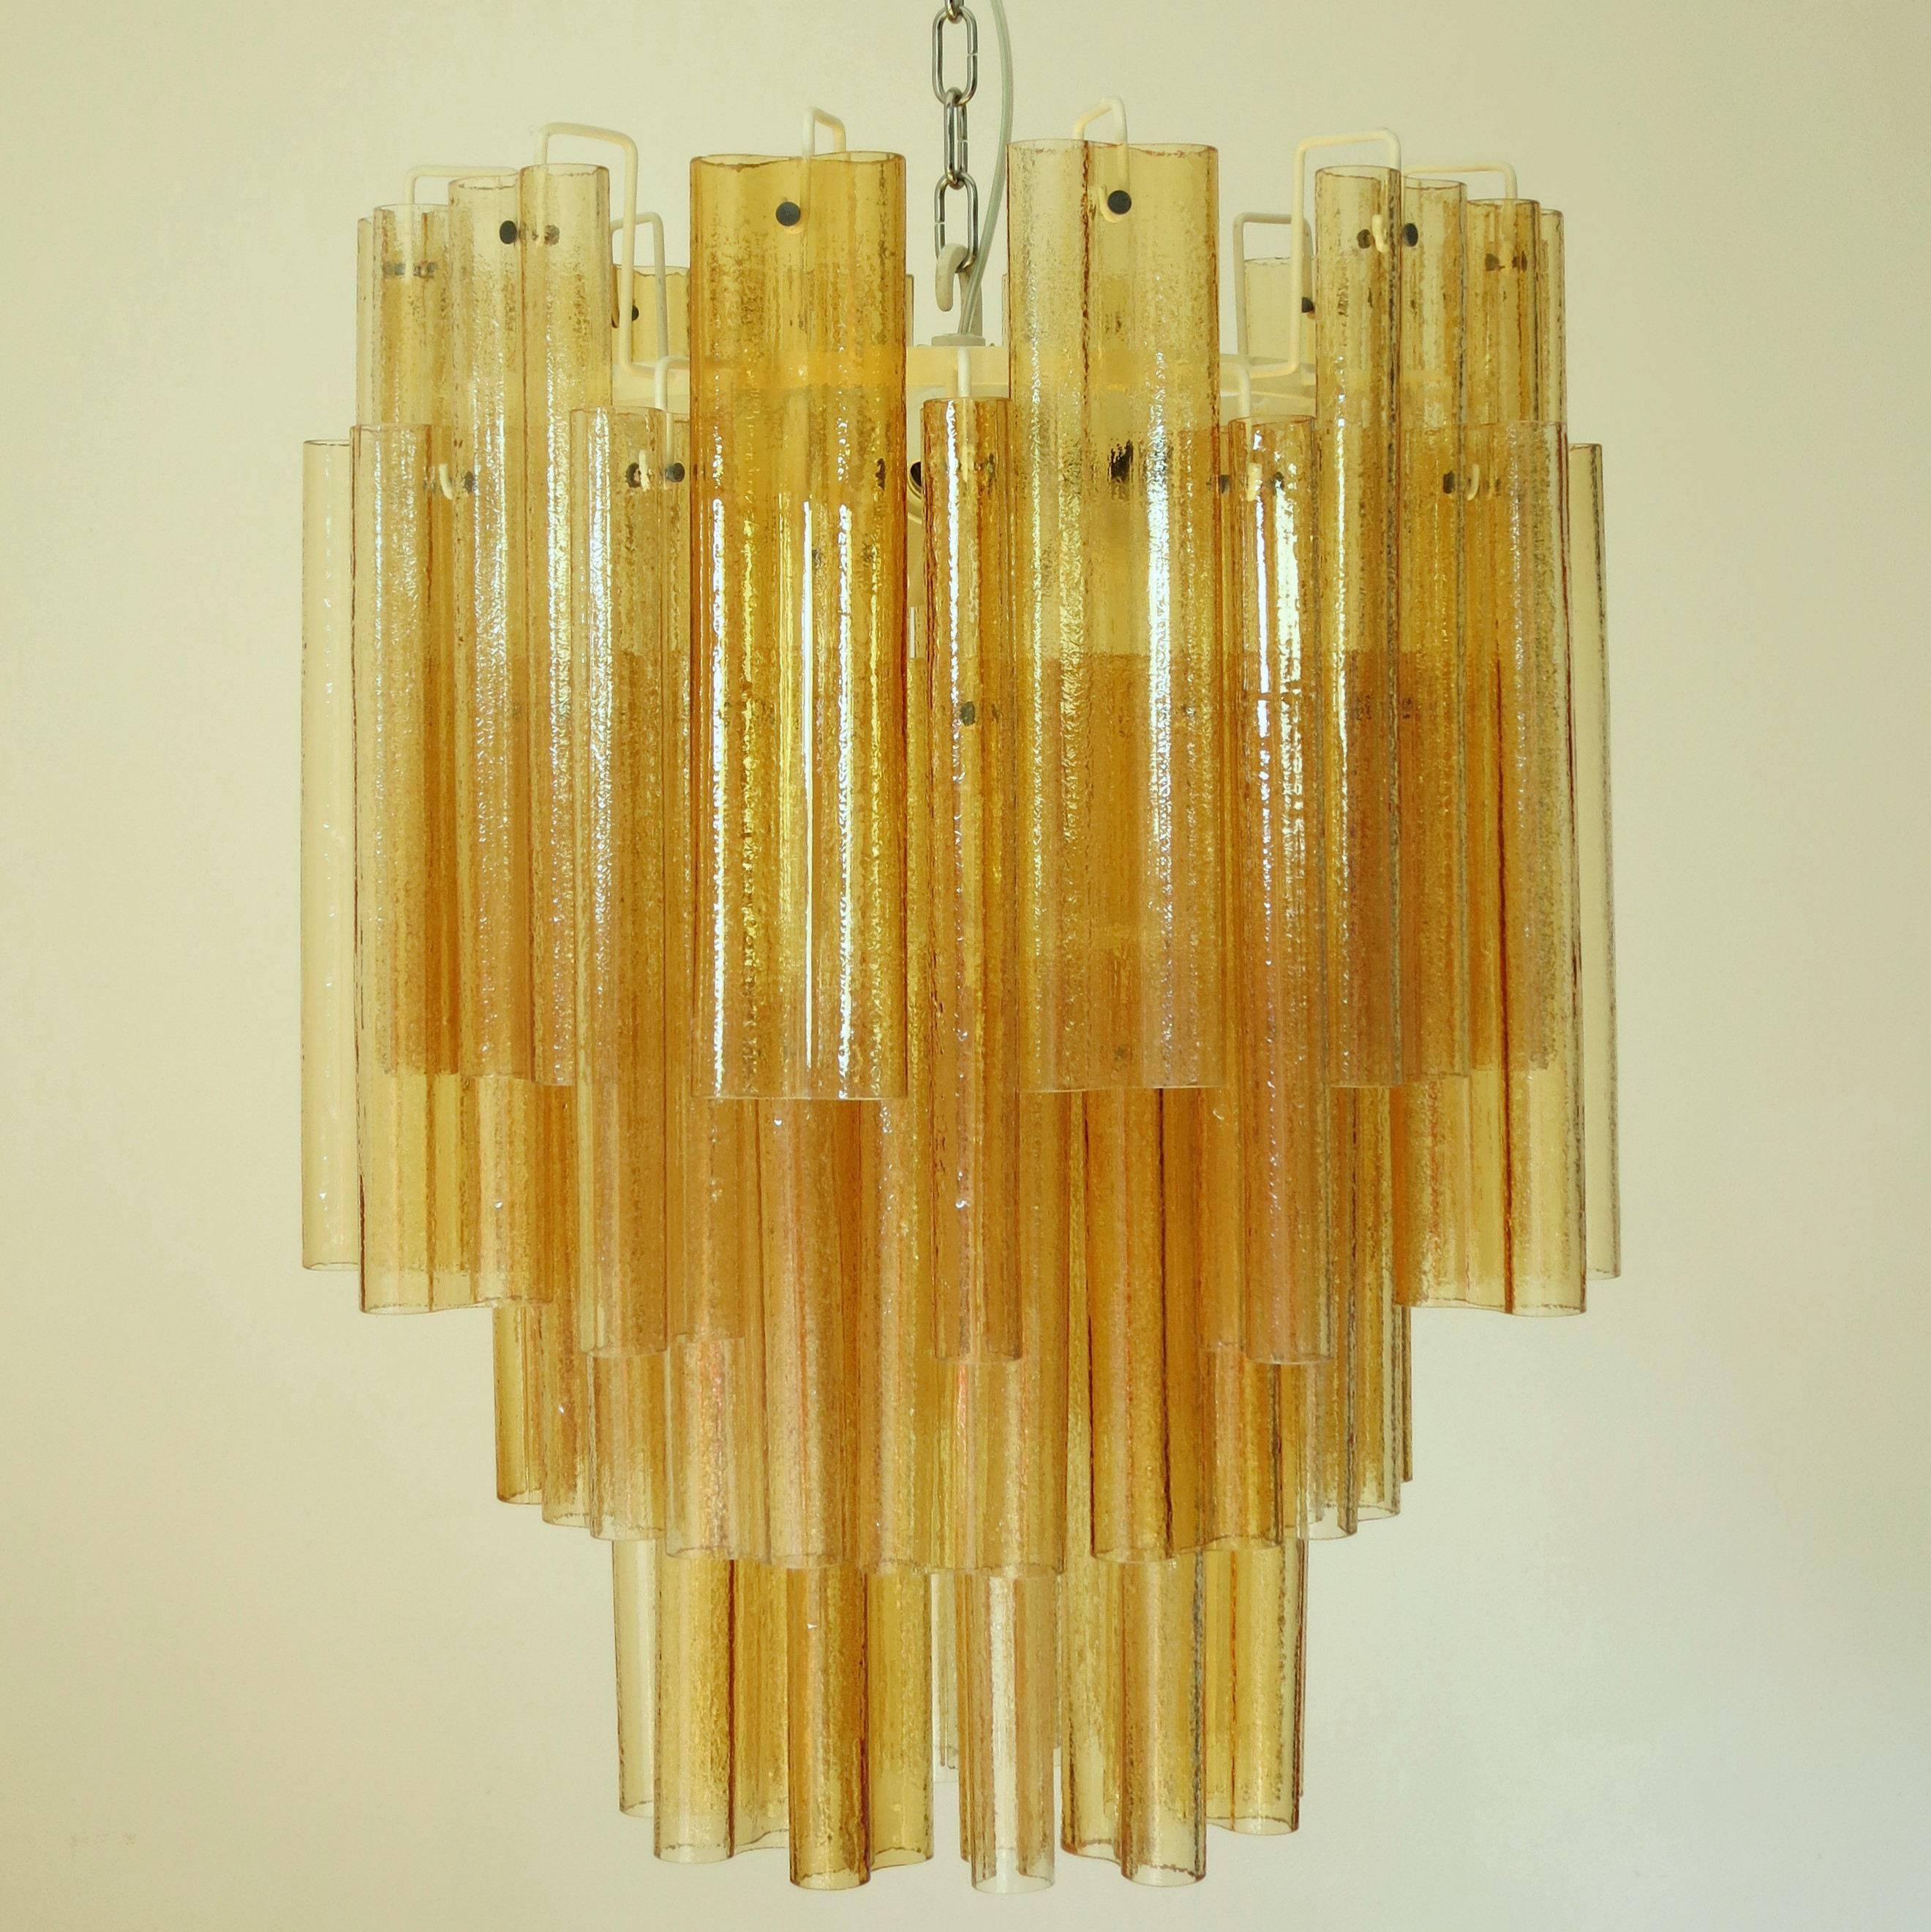 Original Italian vintage chandelier with hand blown amber Murano glass tubes, mounted on painted white metal frame / Attributed to Venini circa 1960s / Made in Italy
Measures: Diameter 26 inches / height 32 inches plus chain and canopy
13 lights /